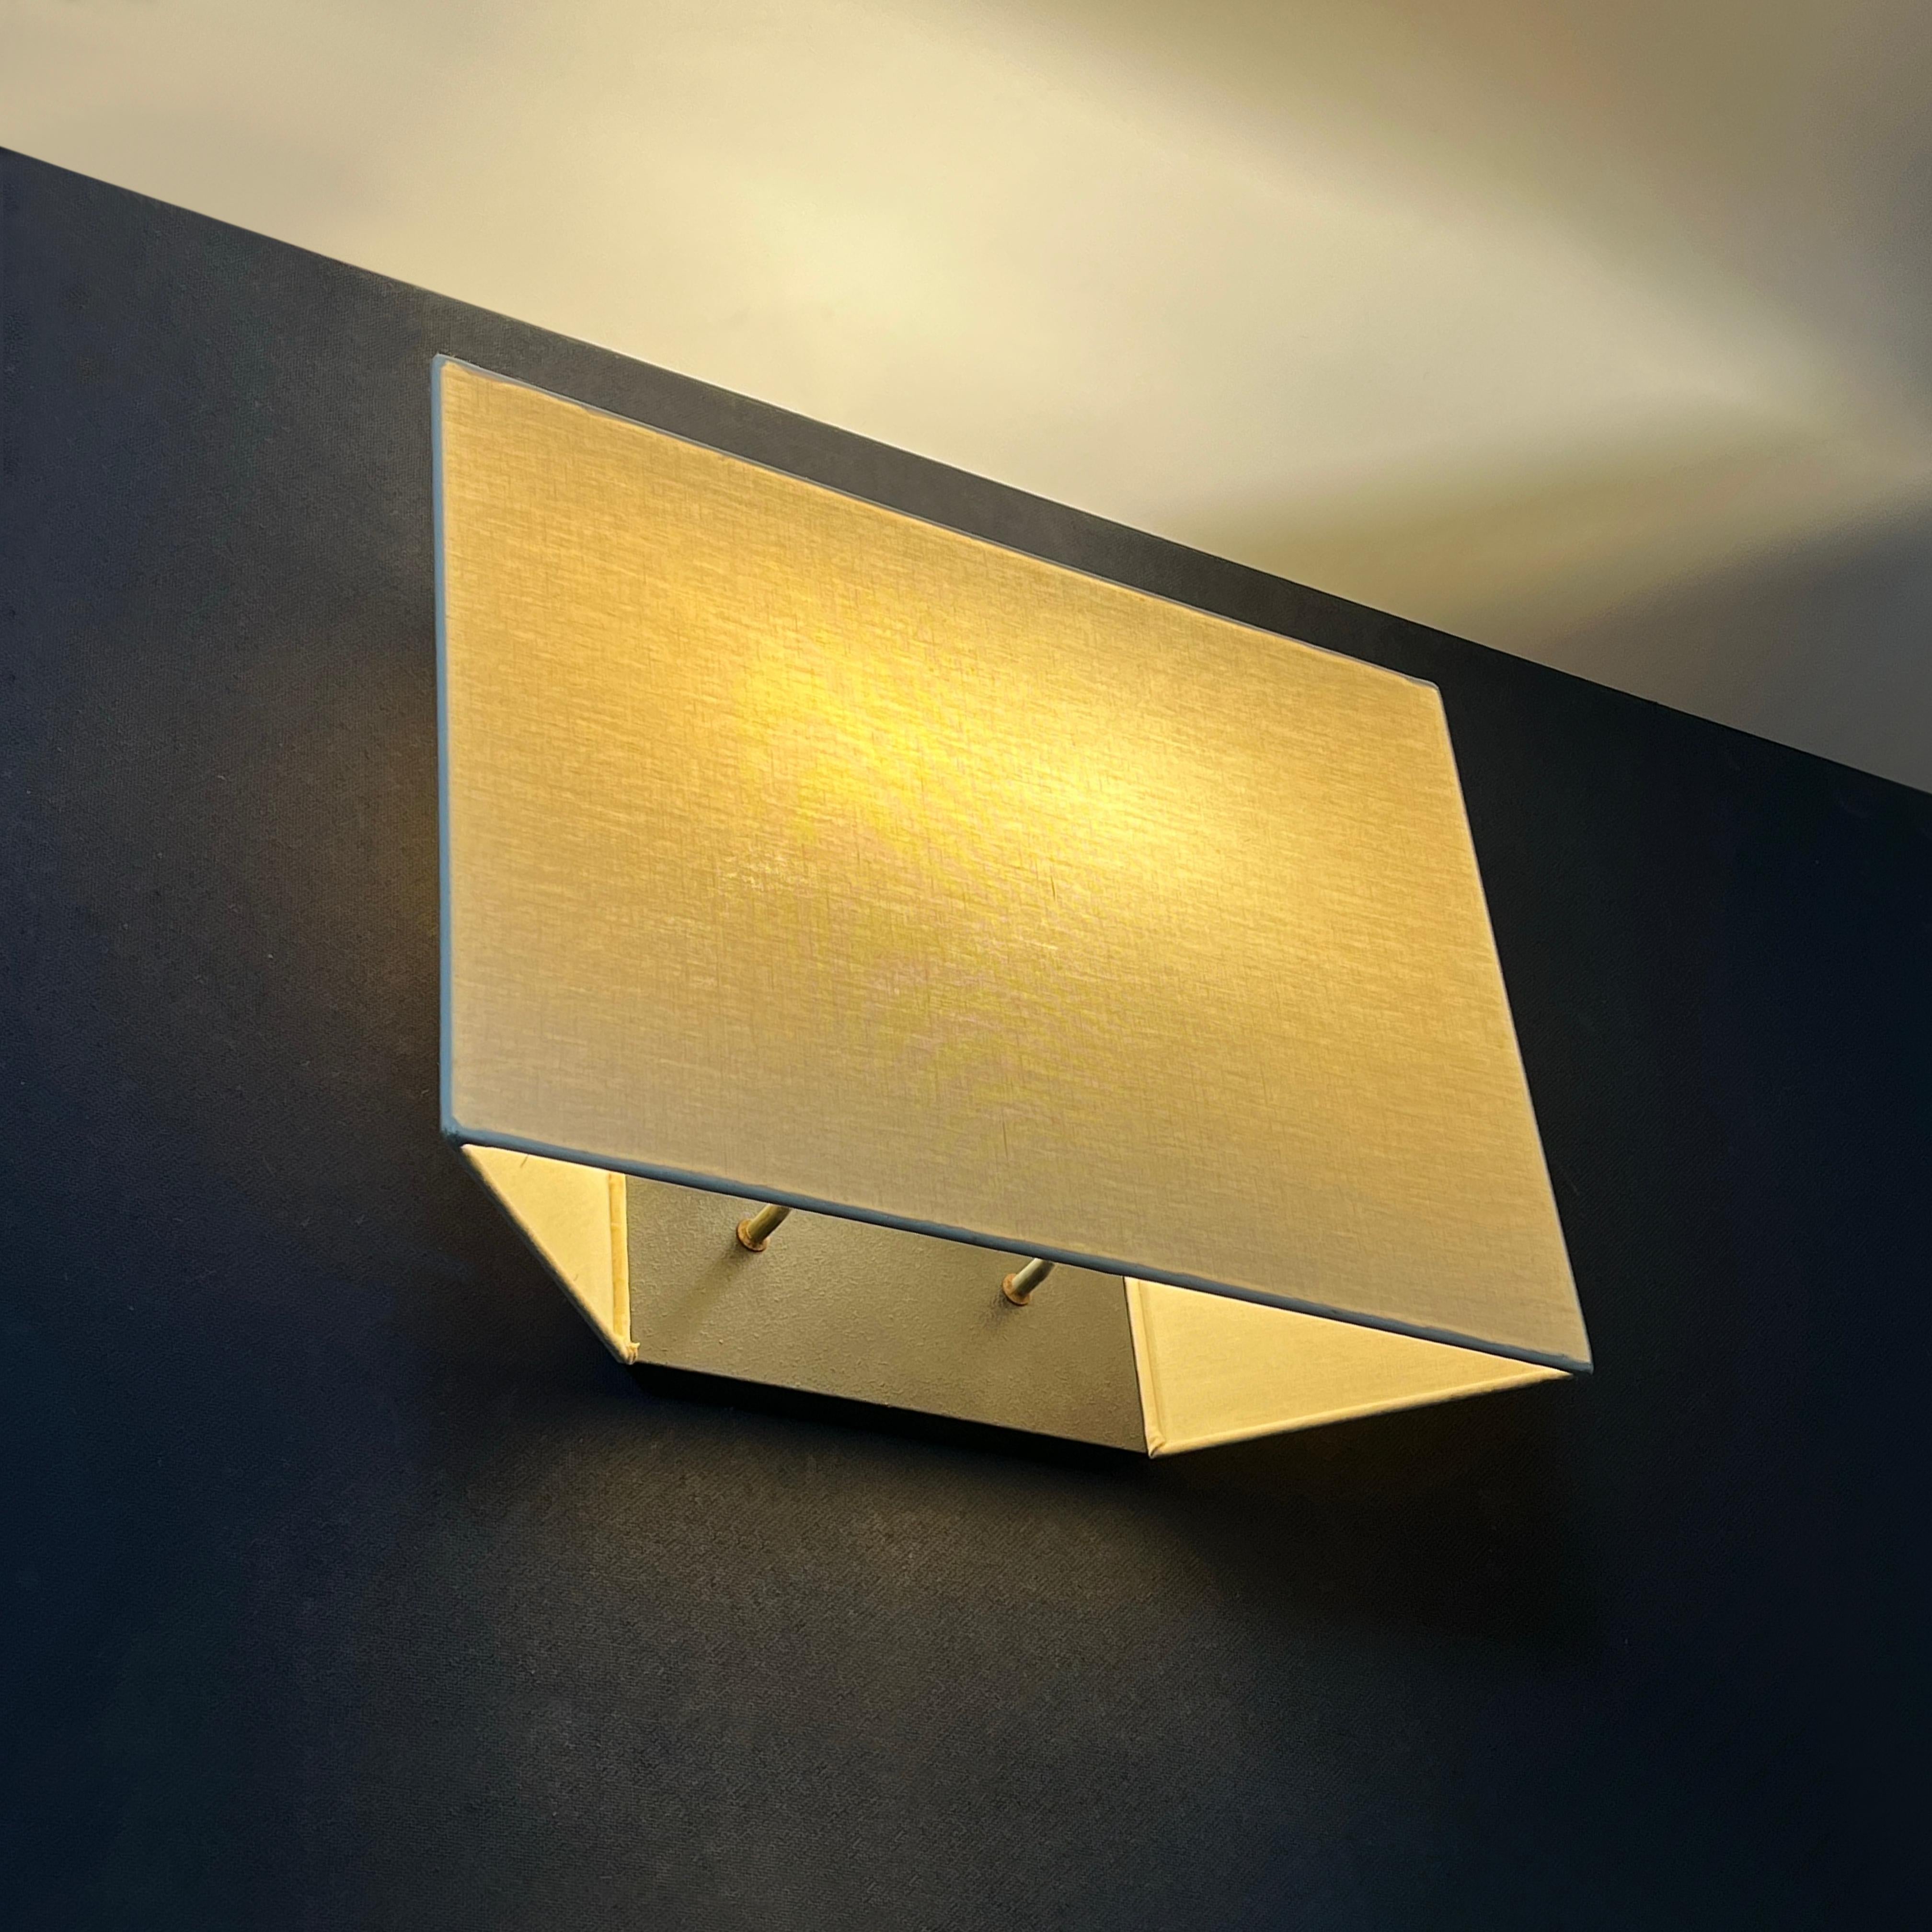 Italian Accademia Wall Lamp by Cini Boeri for Artemide, Italy 1978 For Sale